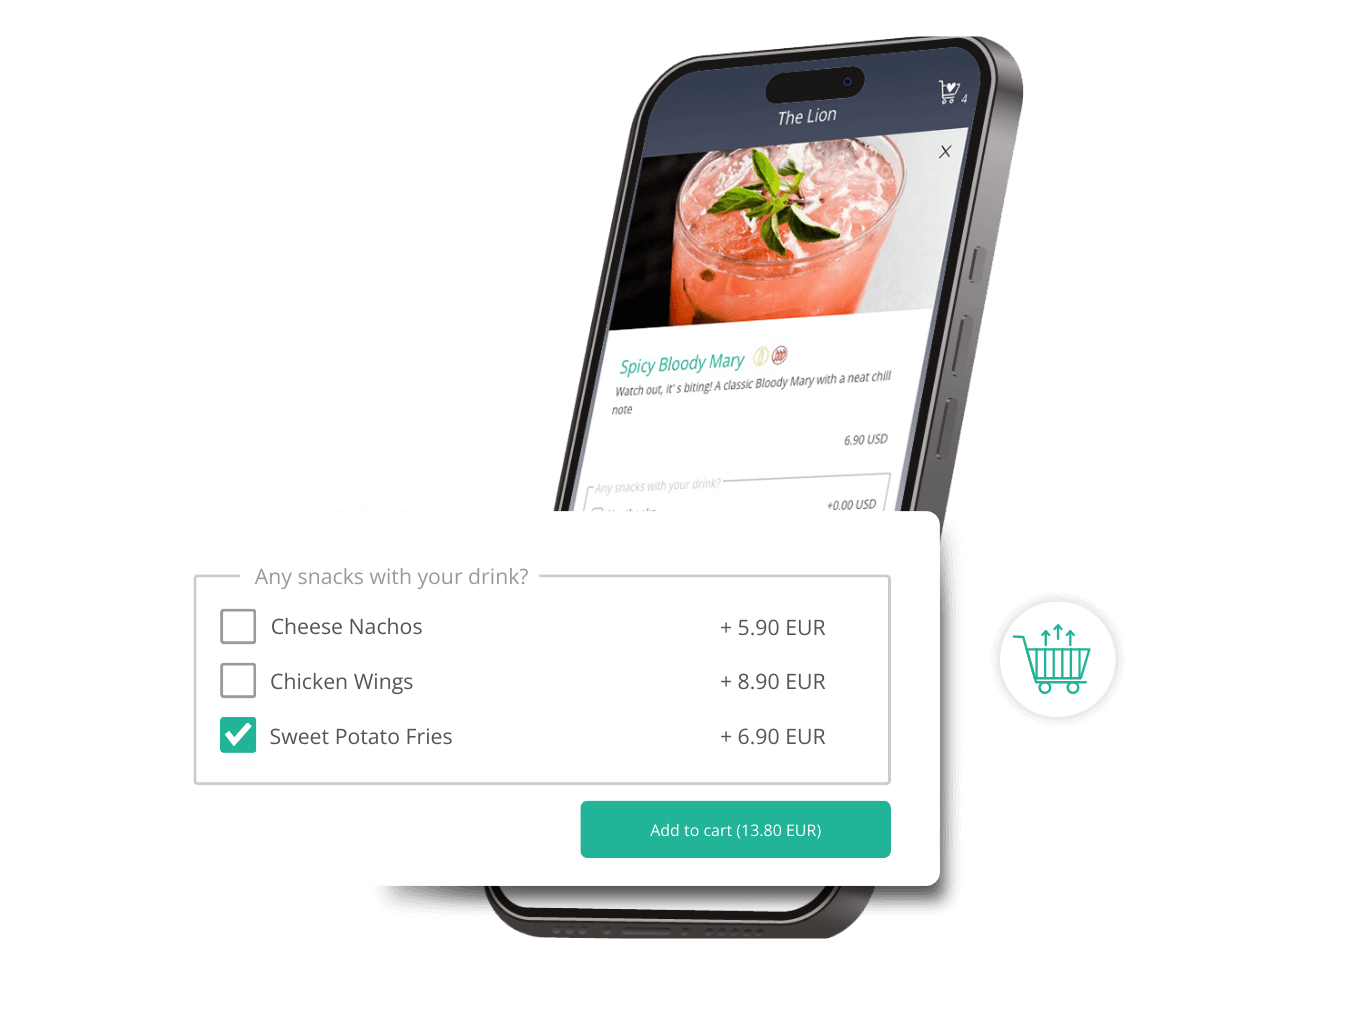 Optimize upselling in the restaurant with table ordering system via self-ordering